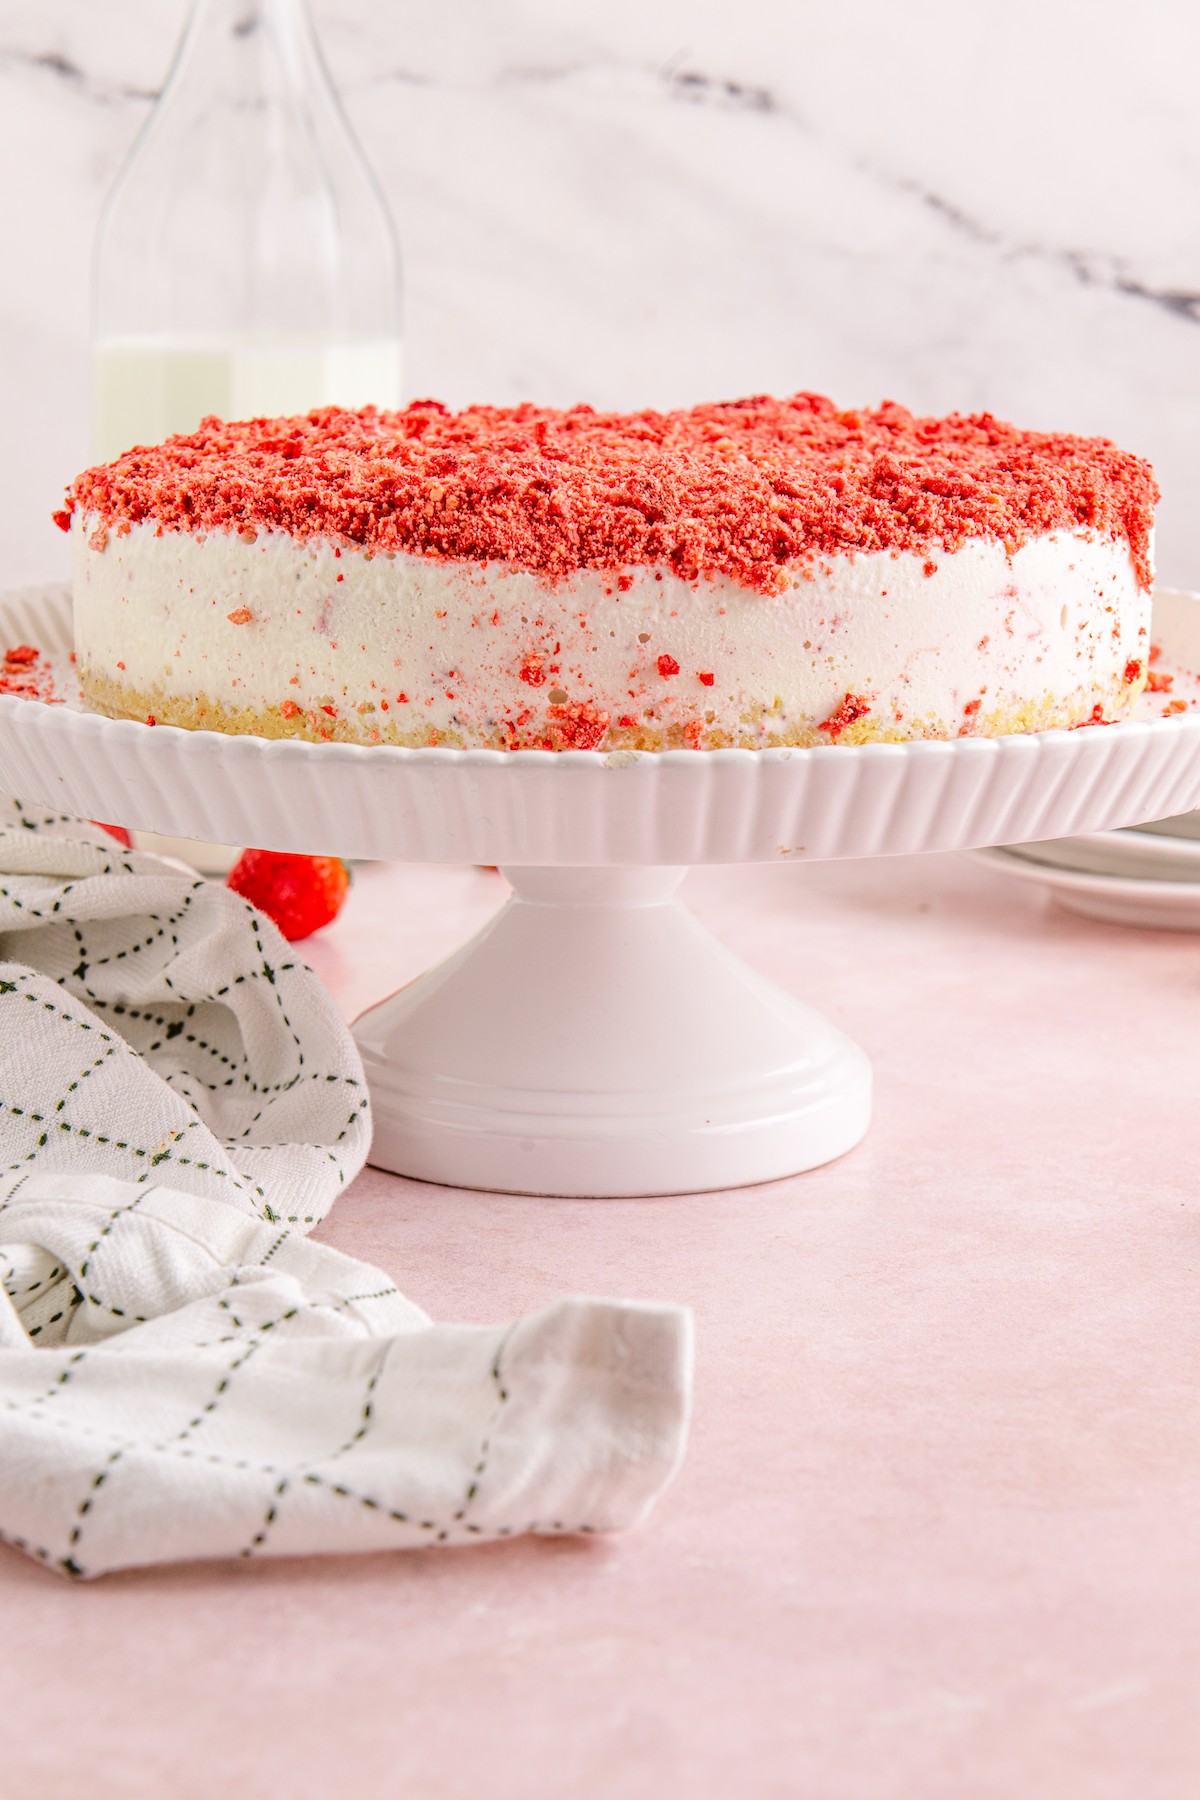 A strawberry shortcake ice cream cake with crumb topping.